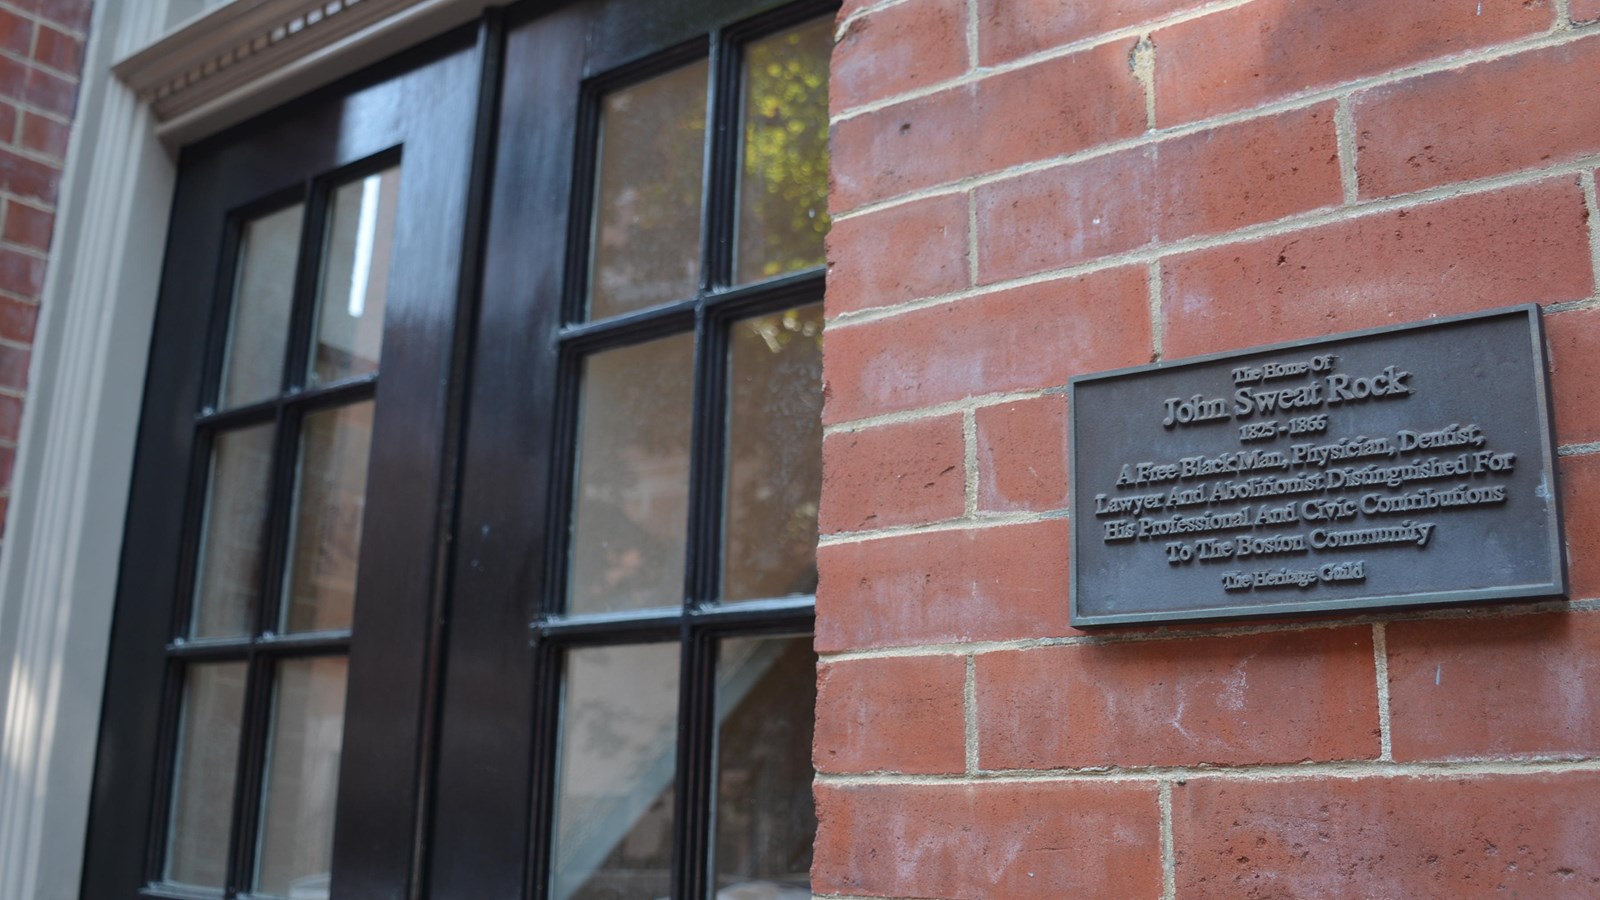 Close-up of a brick building\'s entrance. The door has window panes and there is a historic plaque.